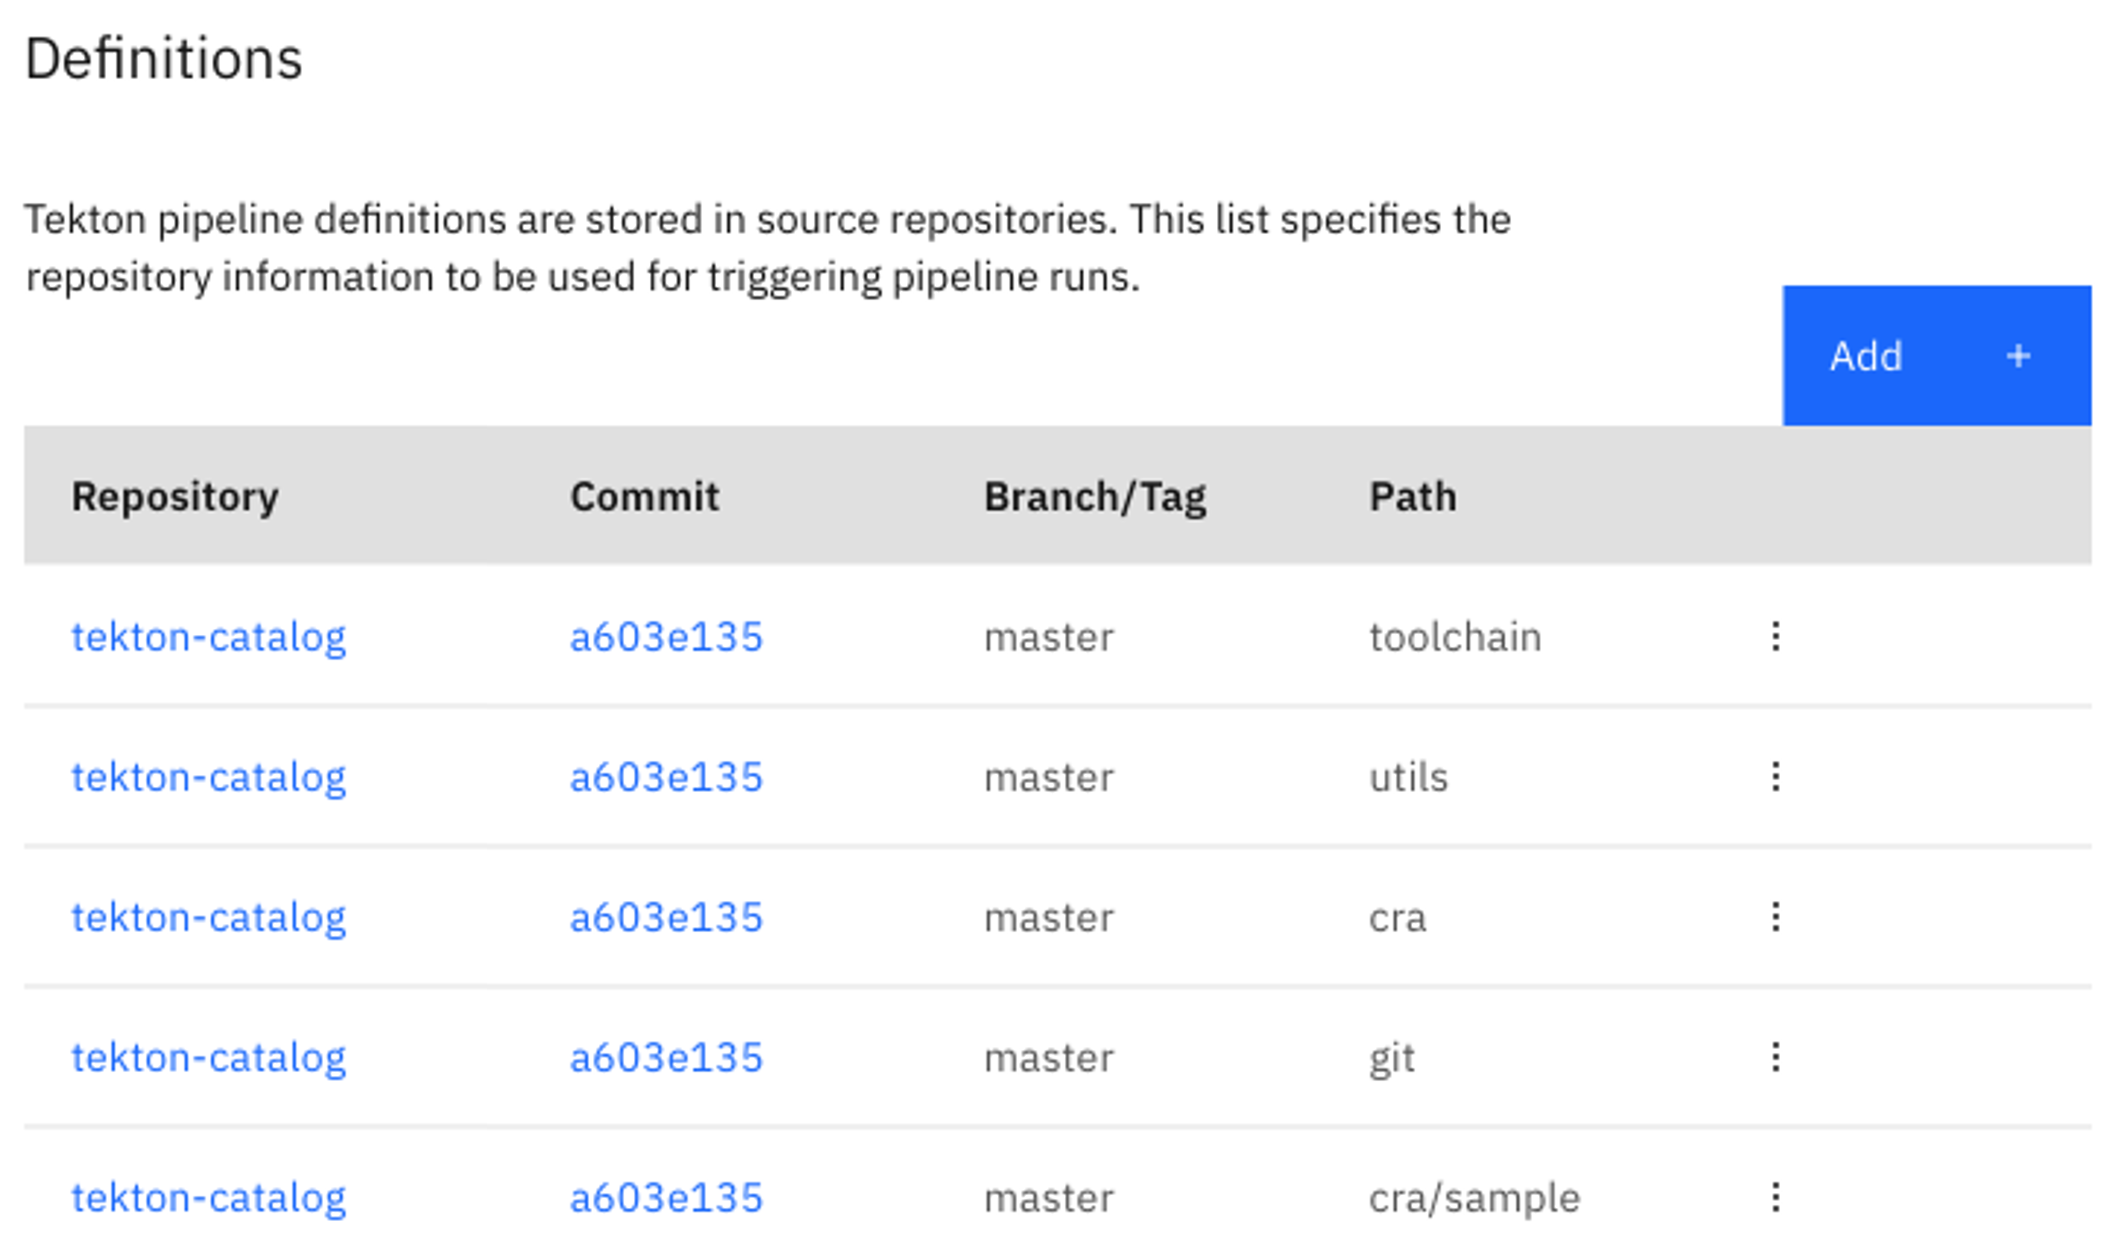 This screenshot shows the list of locations for sources we used for our Code Risk Analyzer pipeline definitions.